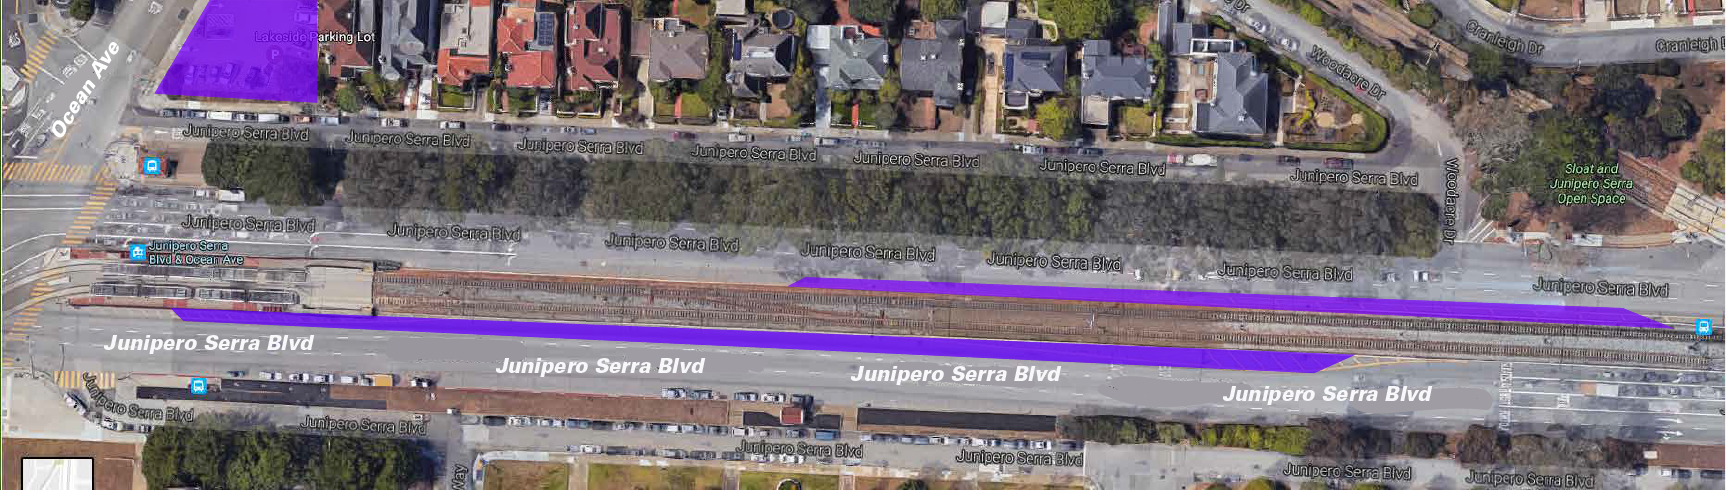 Median space along K Ingleside tracks on Junipero Serra between Ocean and Sloat will be used for staging during the construction. The Lakeside Parking Lot at the corner of Ocean and Junipero Serra will also be used for storage and staging until construction is complete.